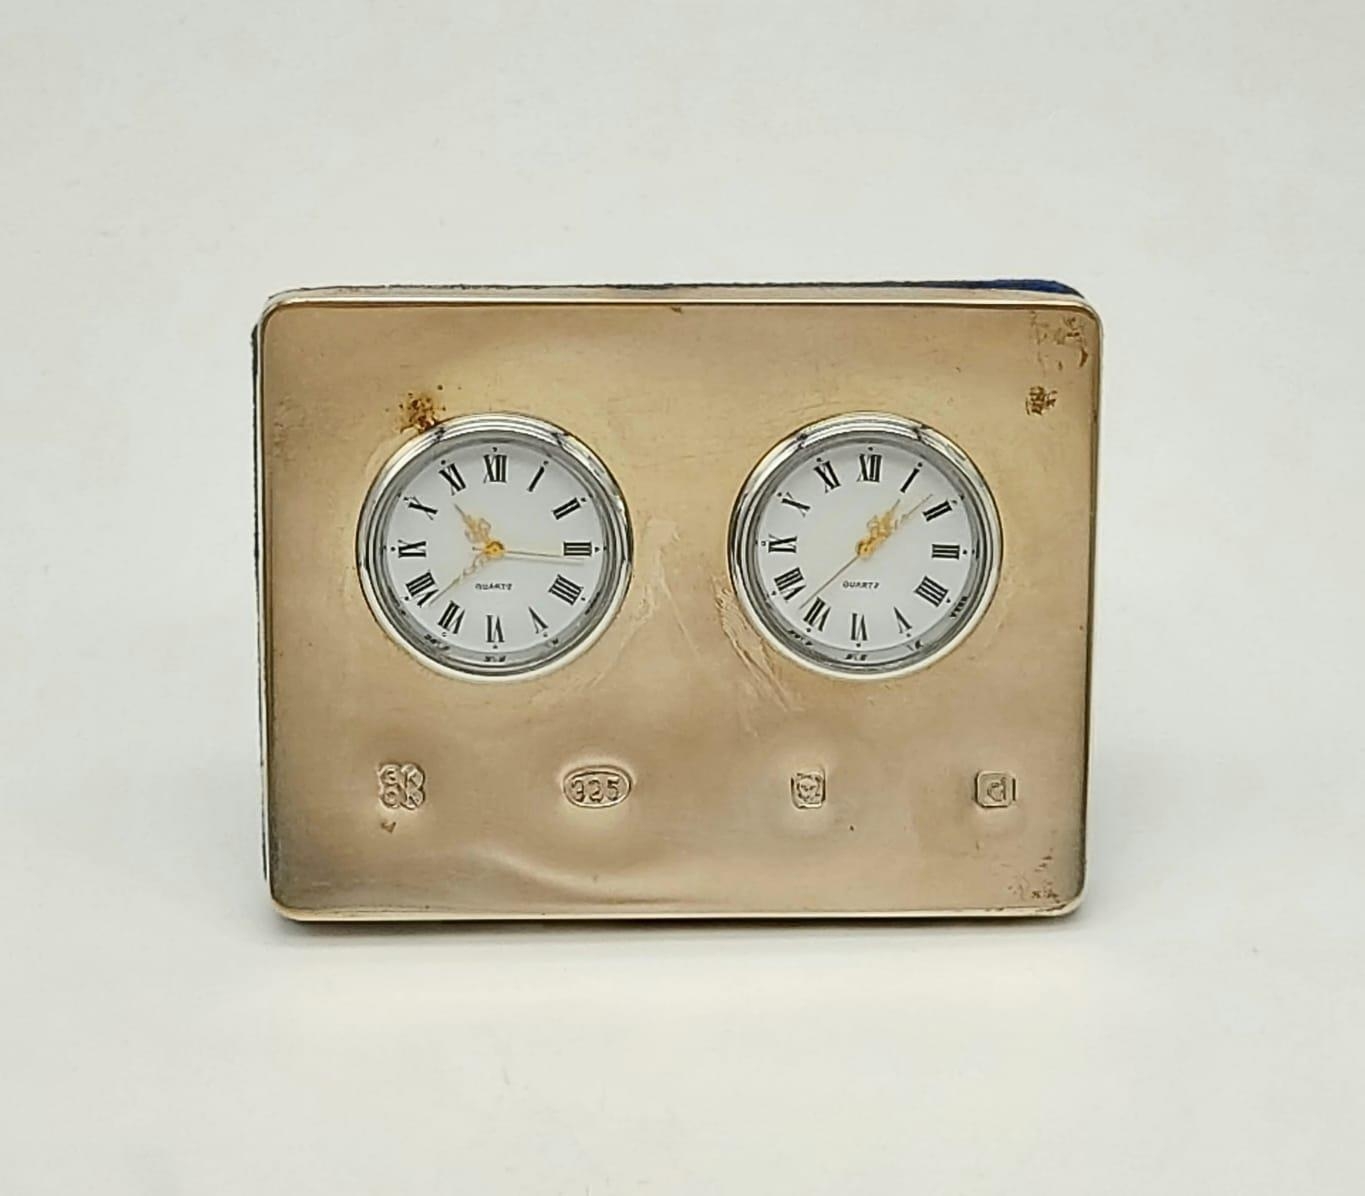 A Gordon and Christopher Kitney Sterling Silver Desk Clock. Two Dials. Quartz movement - needs - Image 2 of 5